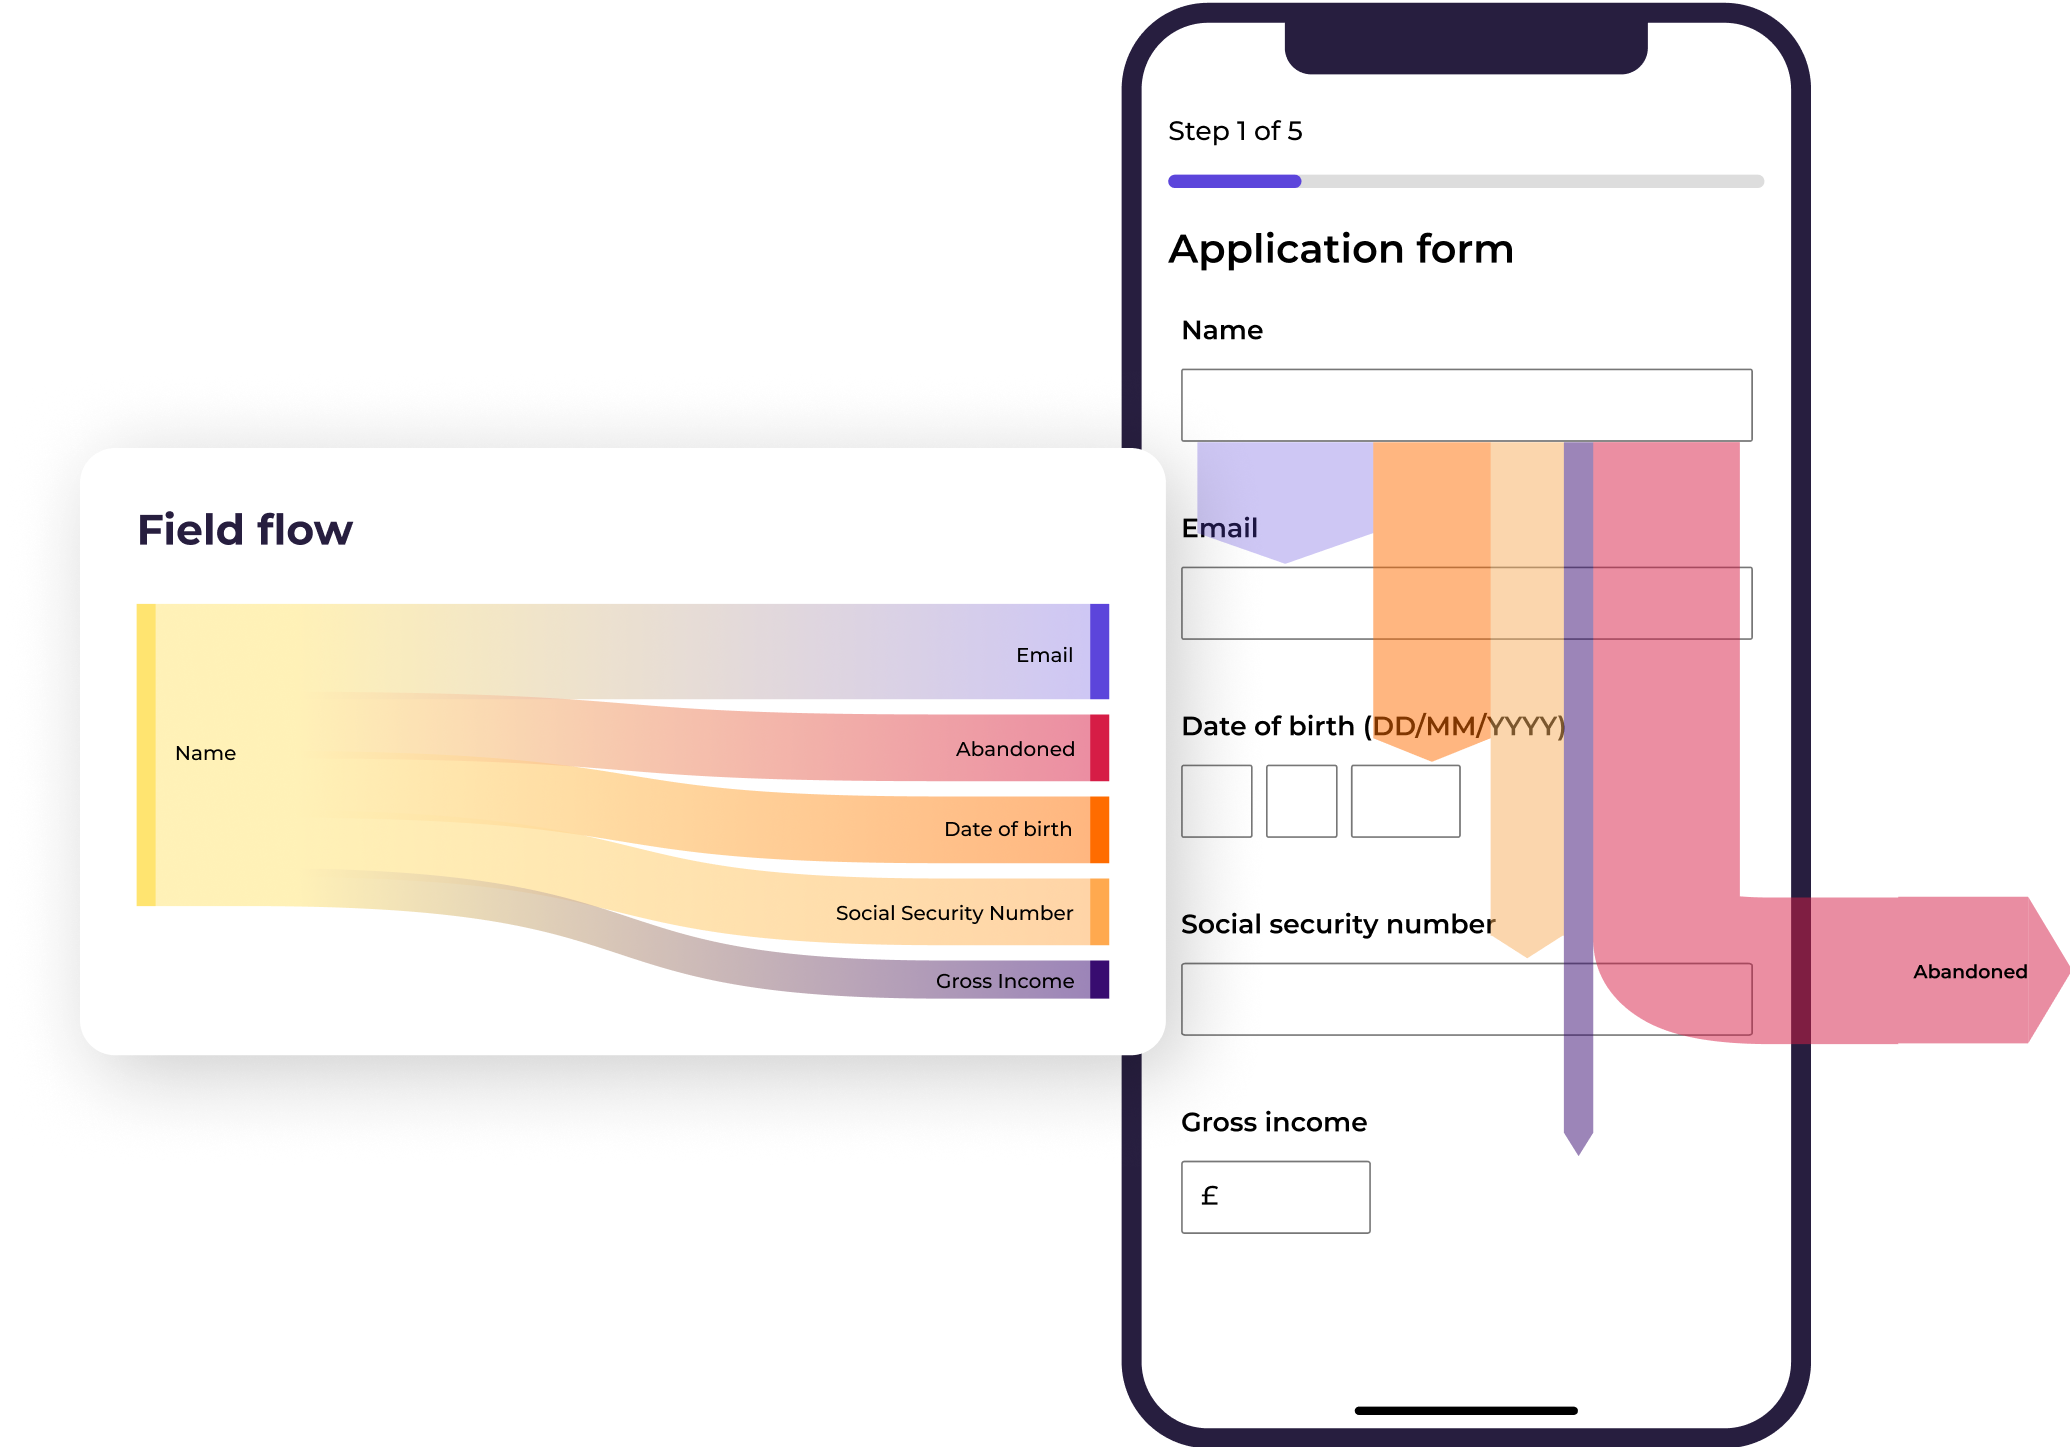 Zuko shows you how users are flowing through the form